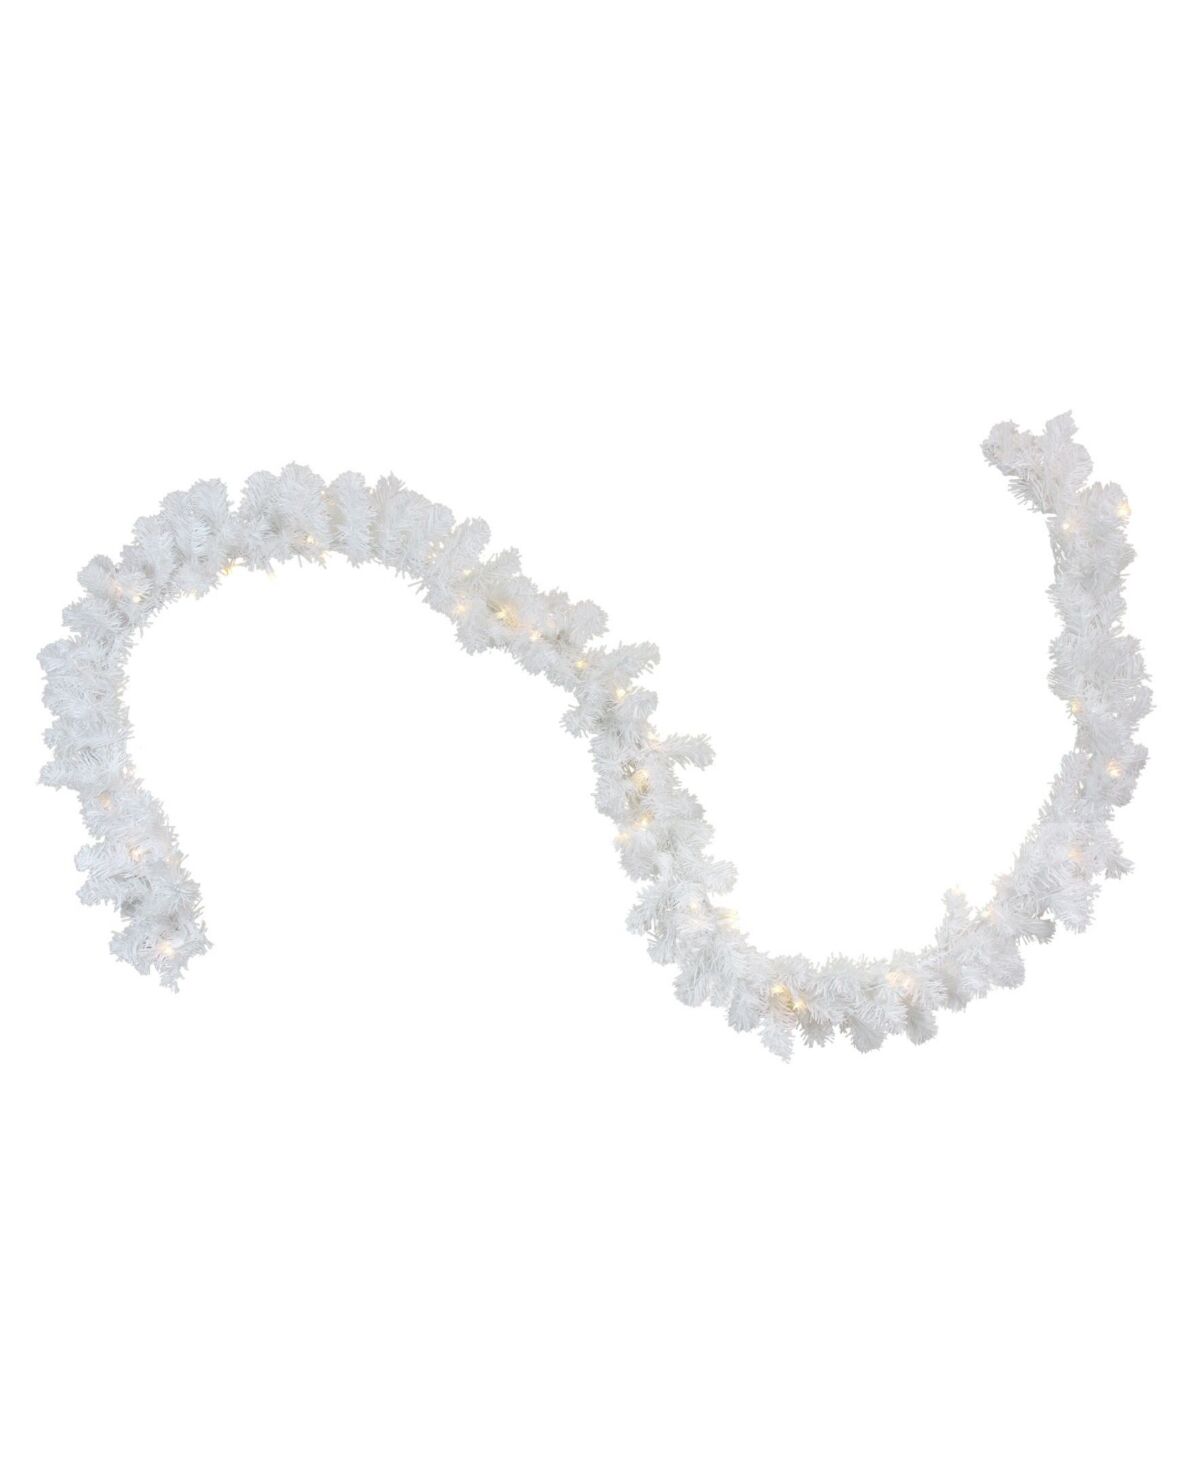 Northlight 9' Pre-Lit Led White Pine Artificial Christmas Garland - Clear Lights - White